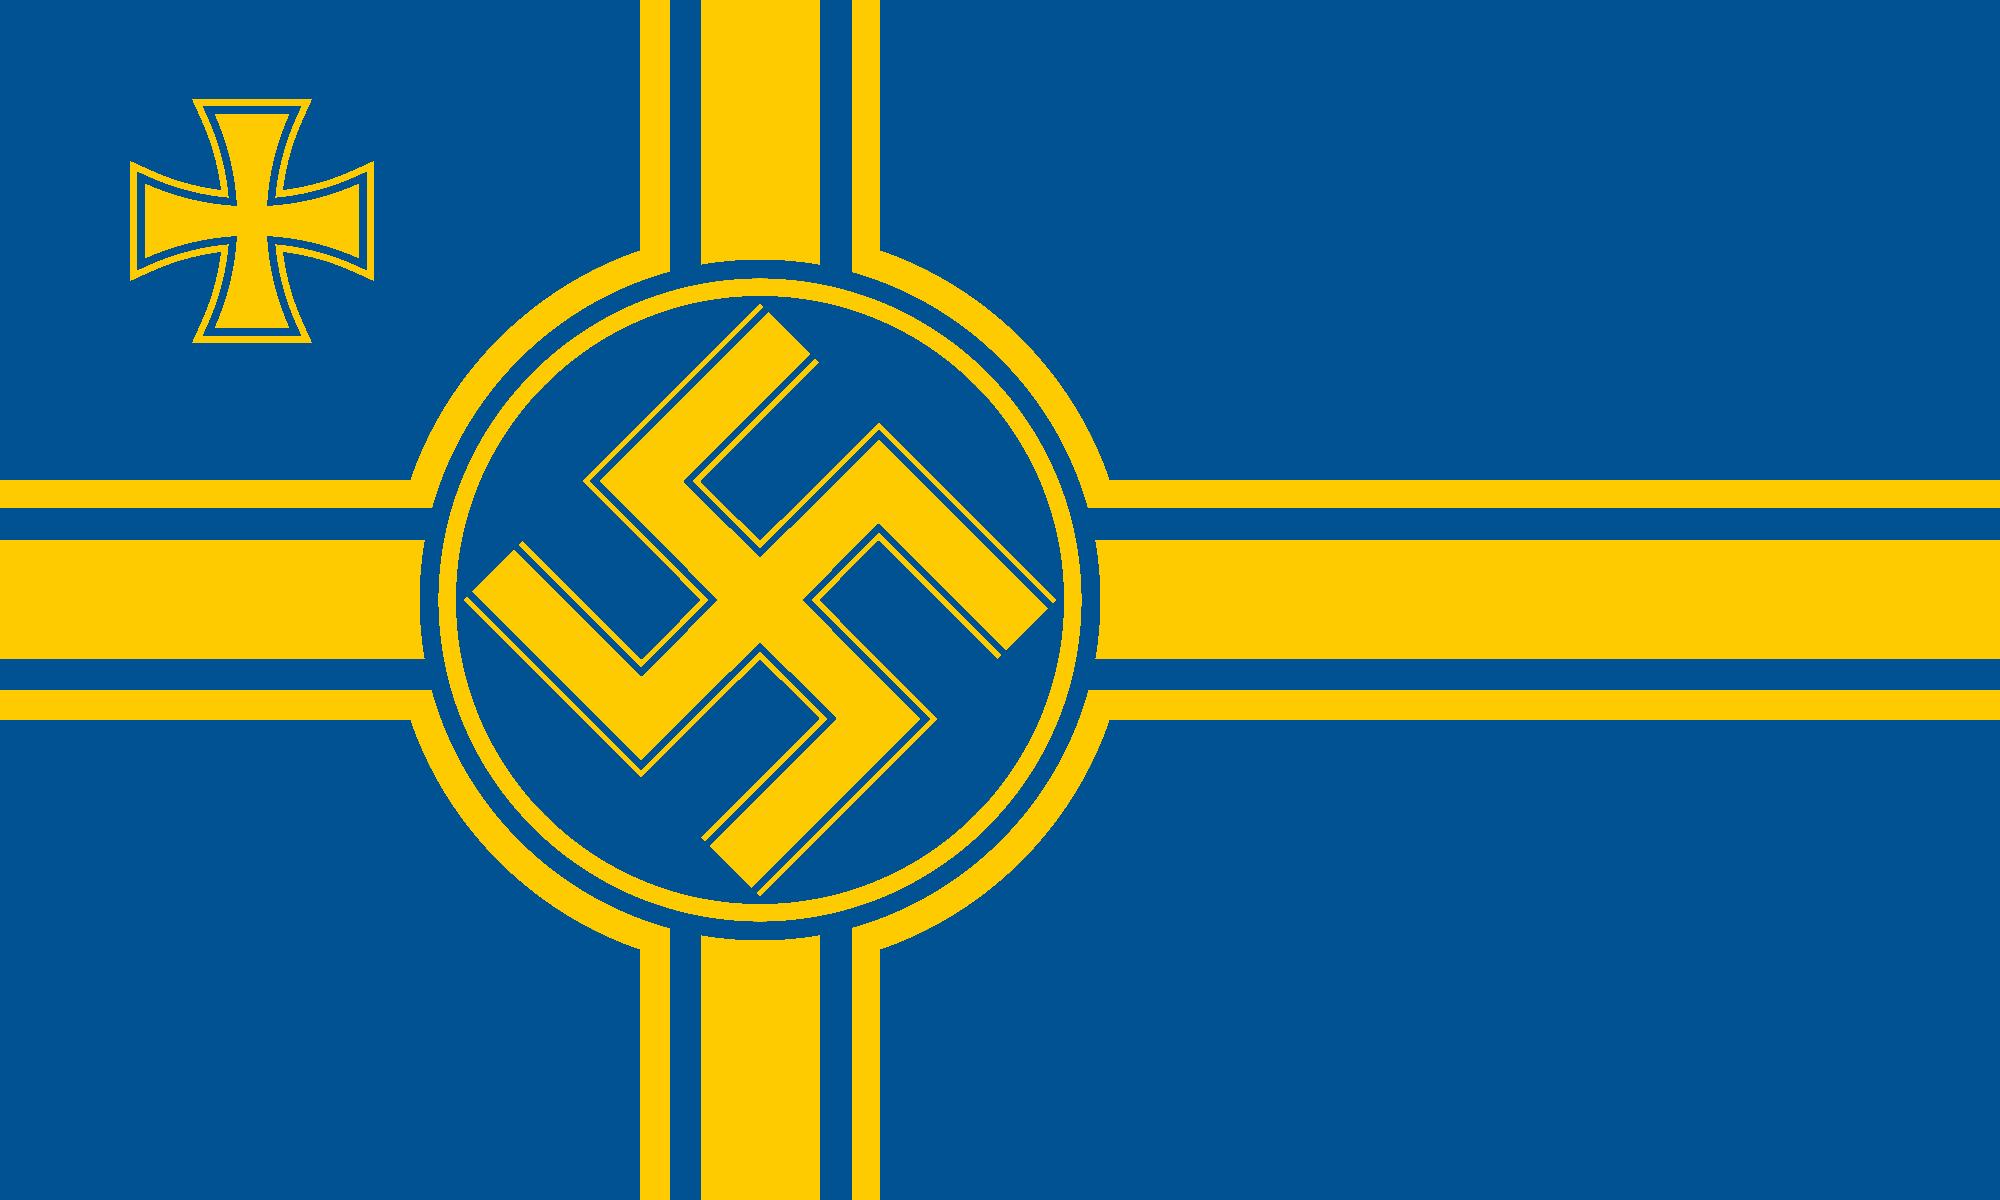 Flag Of Sweden Backgrounds, Compatible - PC, Mobile, Gadgets| 2000x1200 px